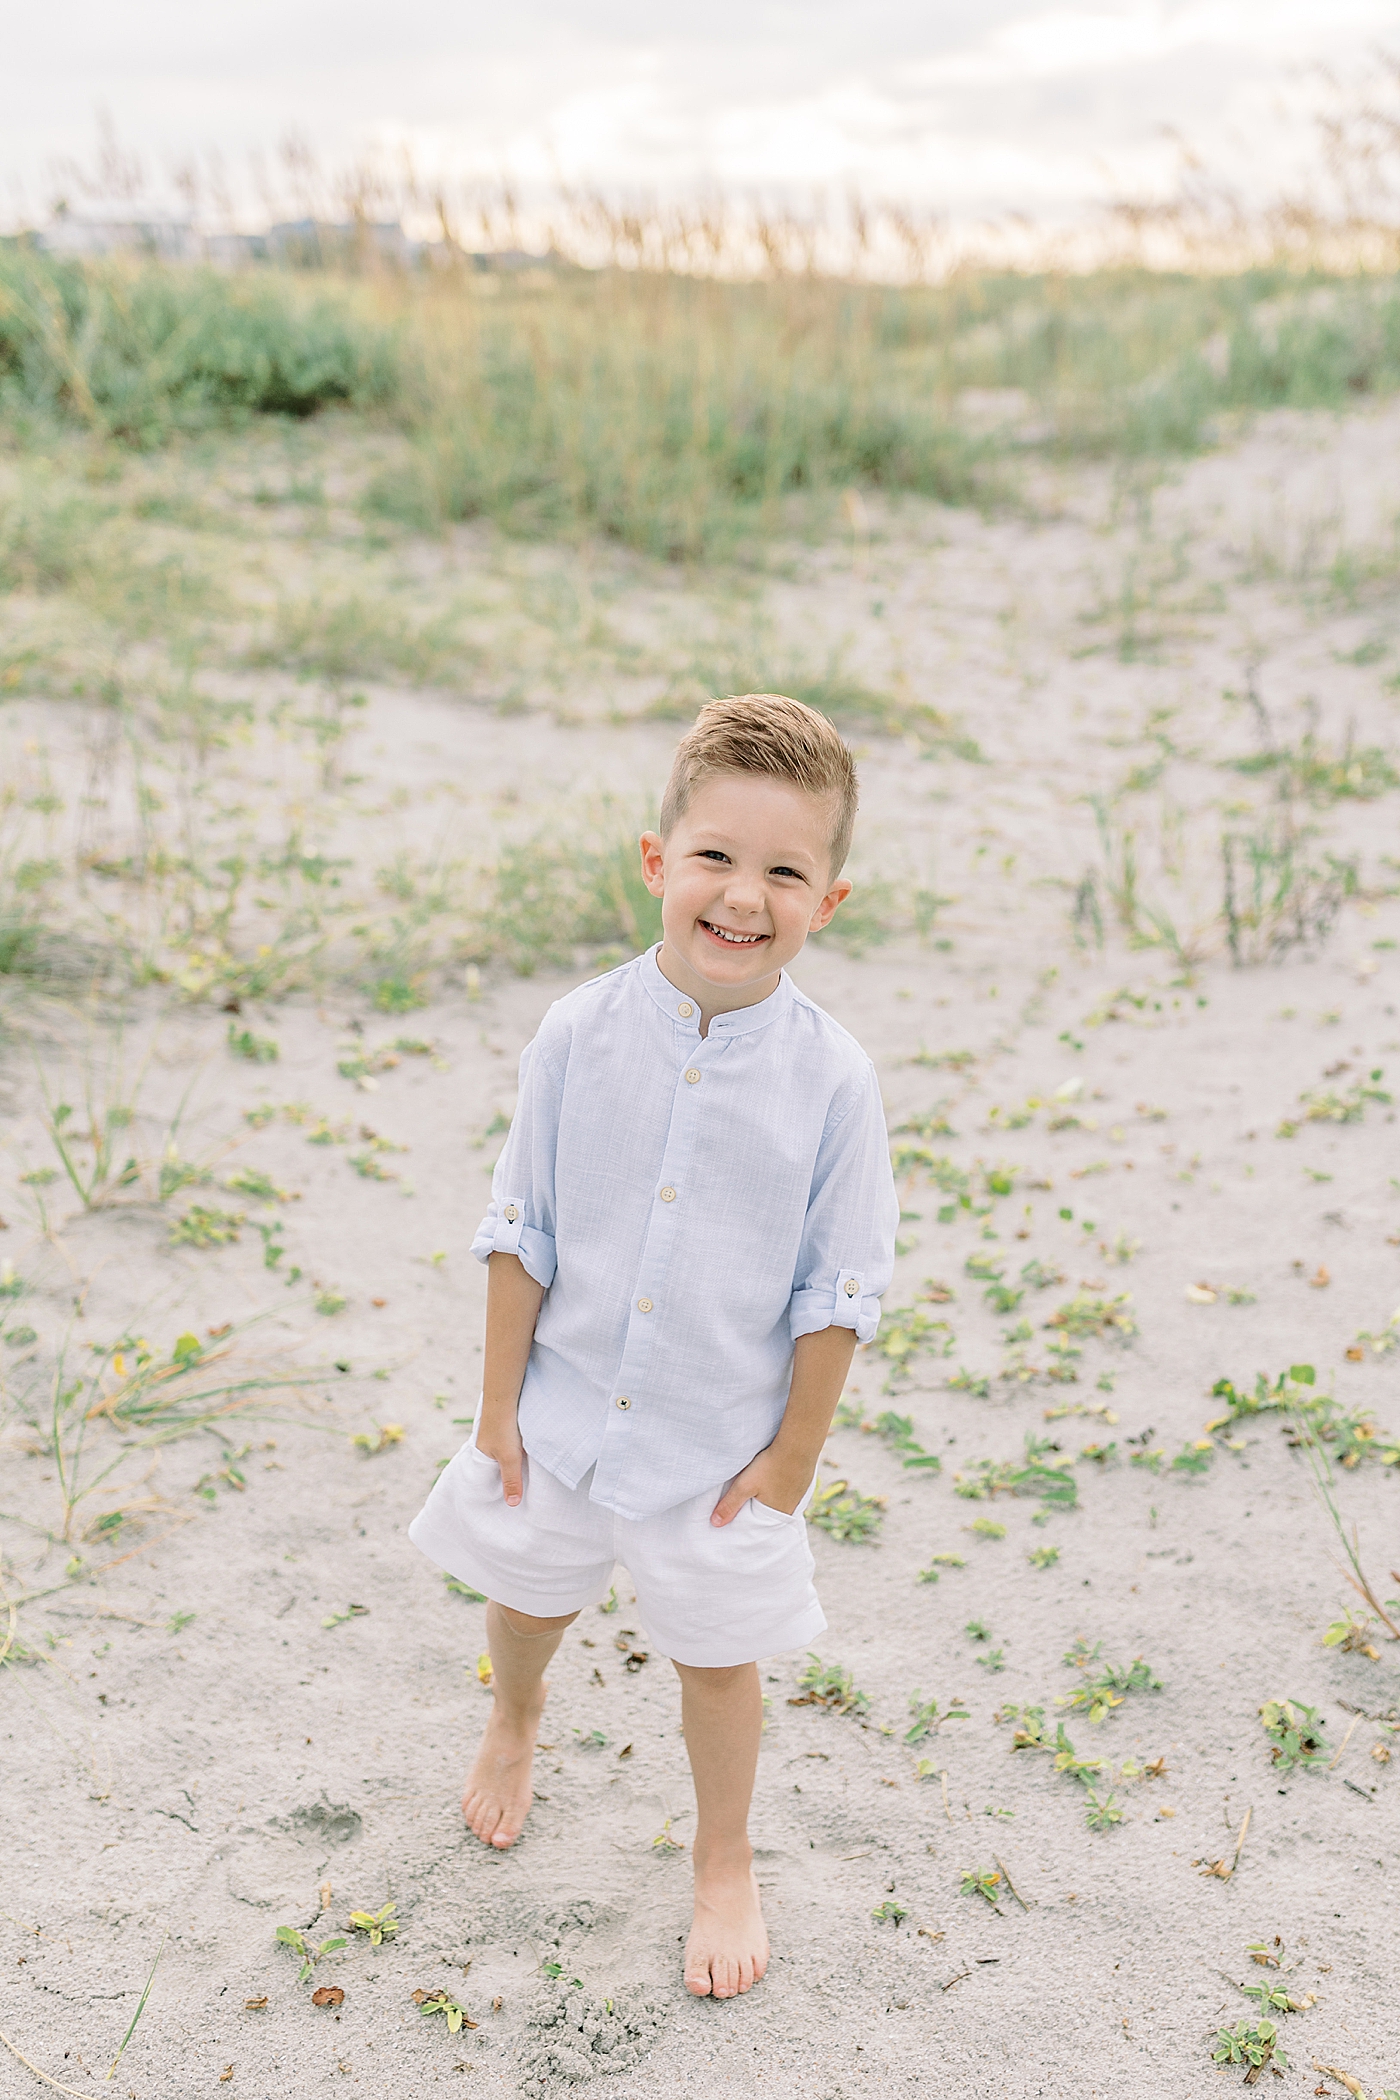 Little boy smiling with his hands in his pocket | Preparing for Family Beach Session with Caitlyn Motycka